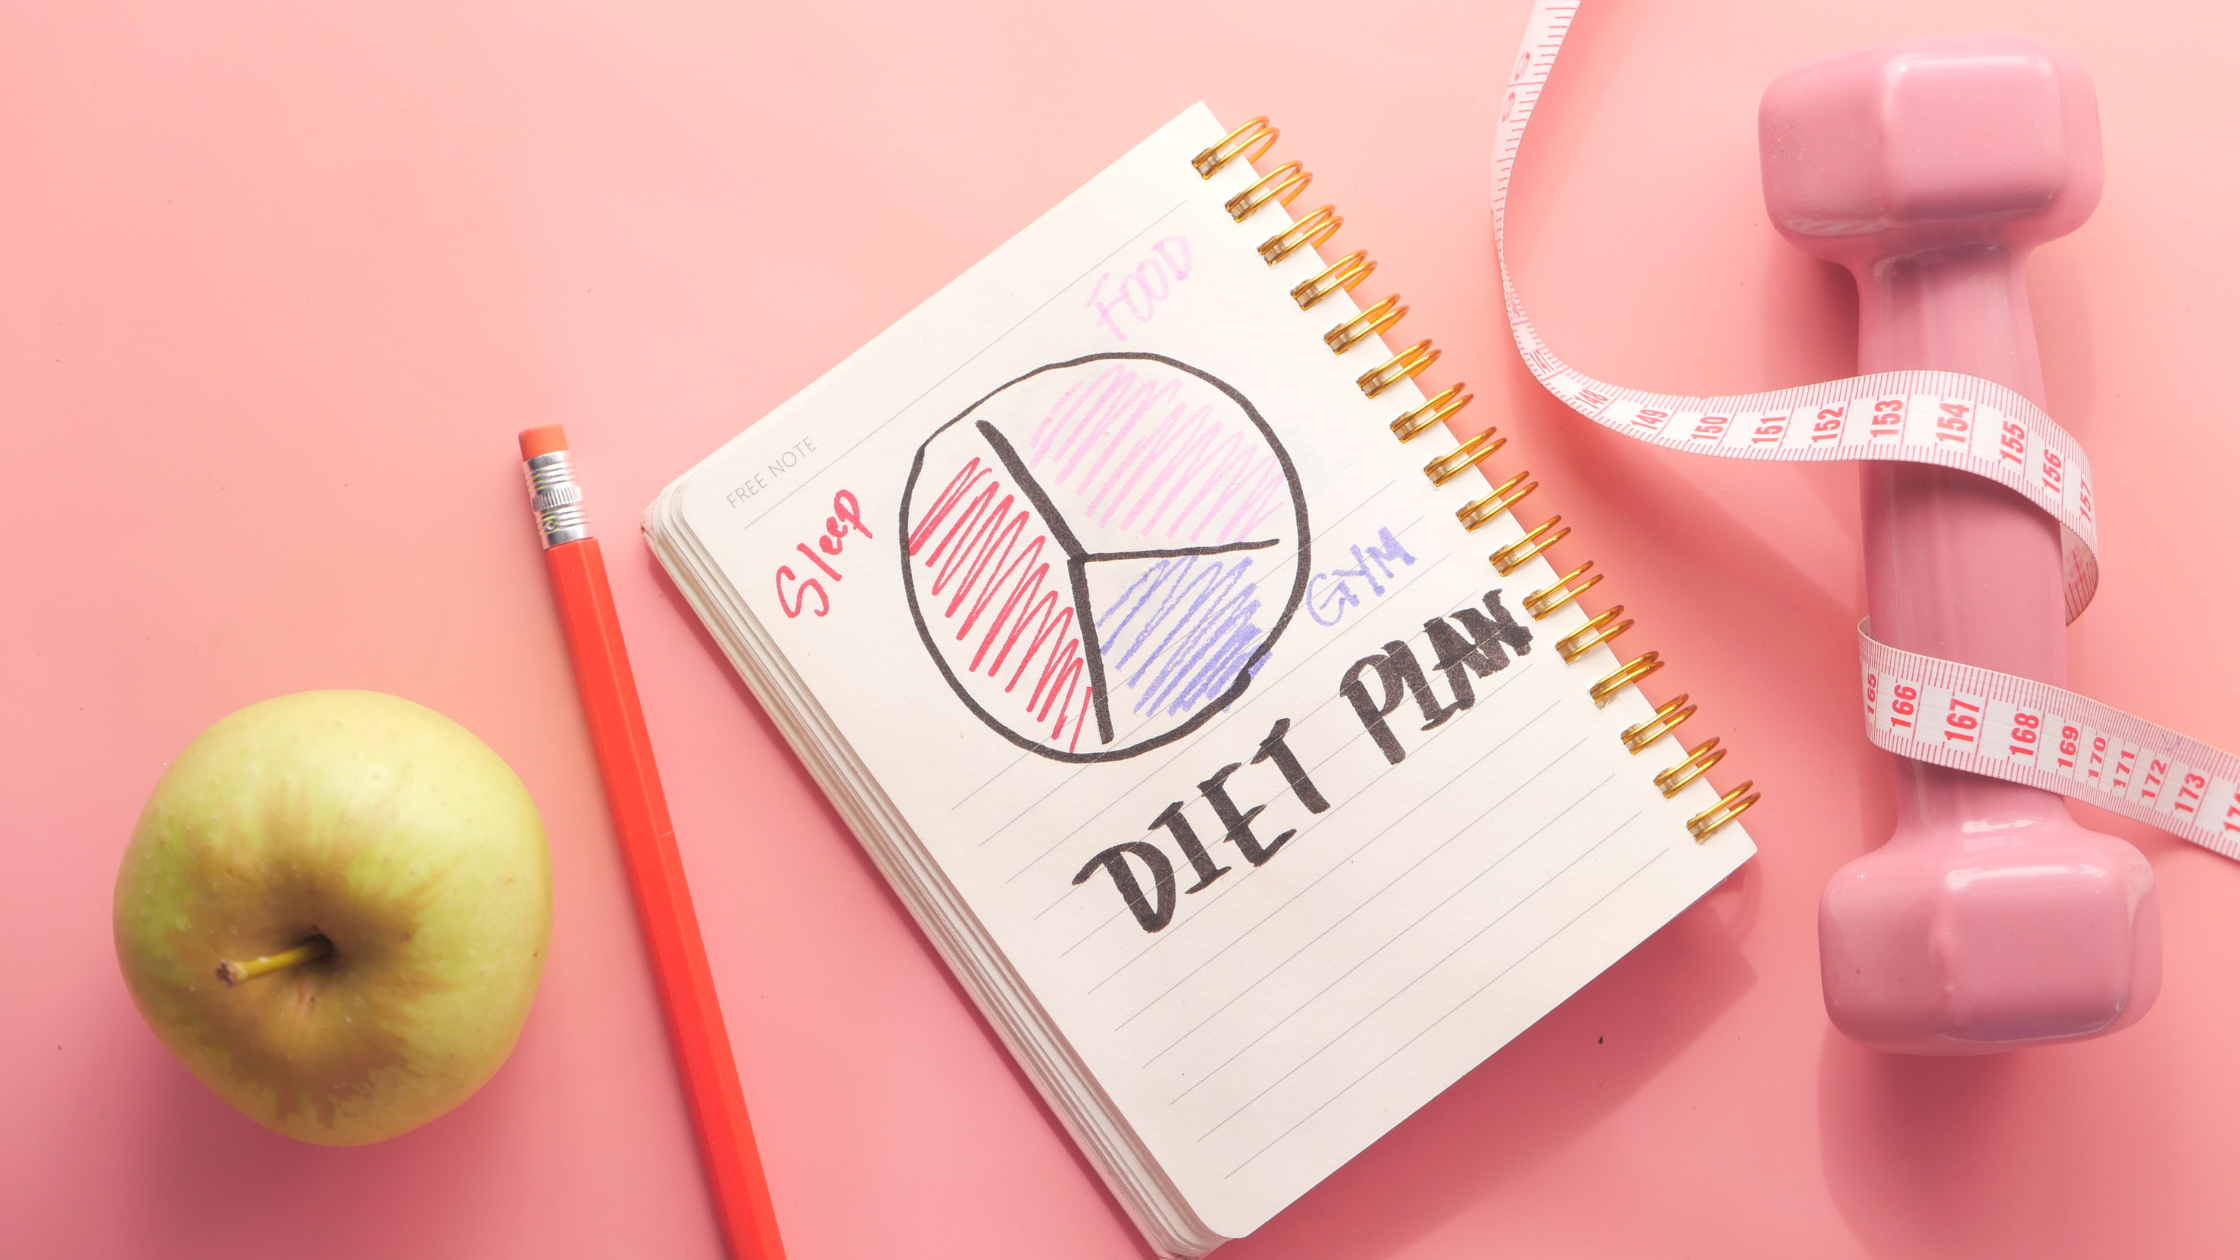 apple, weight, measuring tape, and a notebook saying "diet plan" on a table